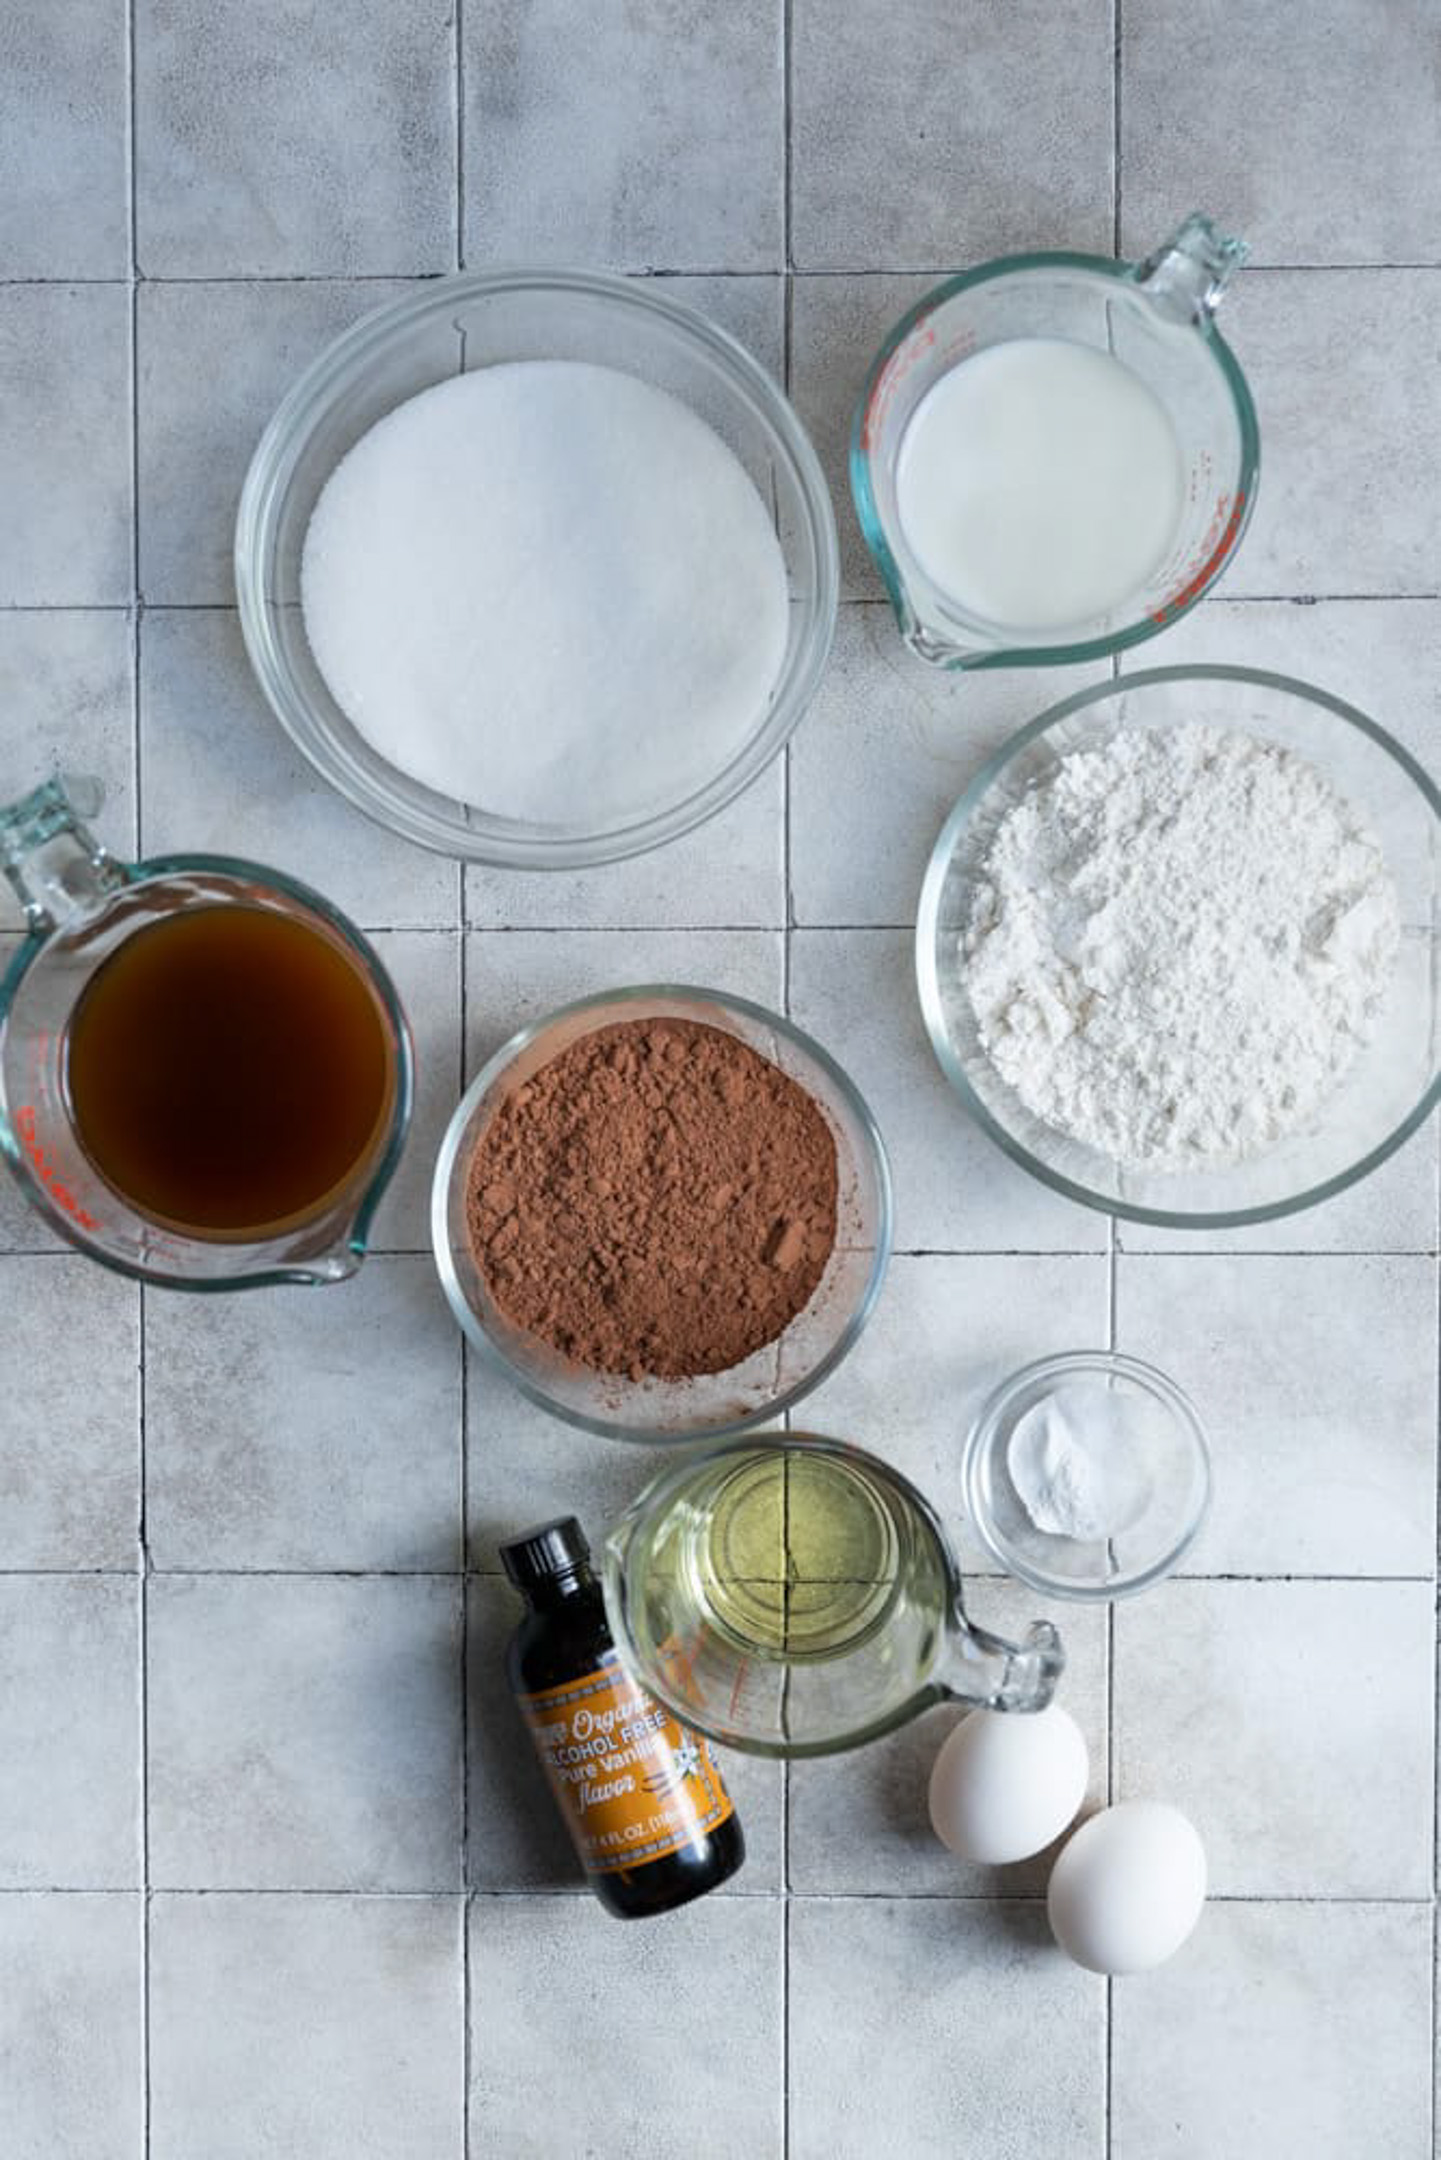 Ingredients for Nutella Cupcakes.